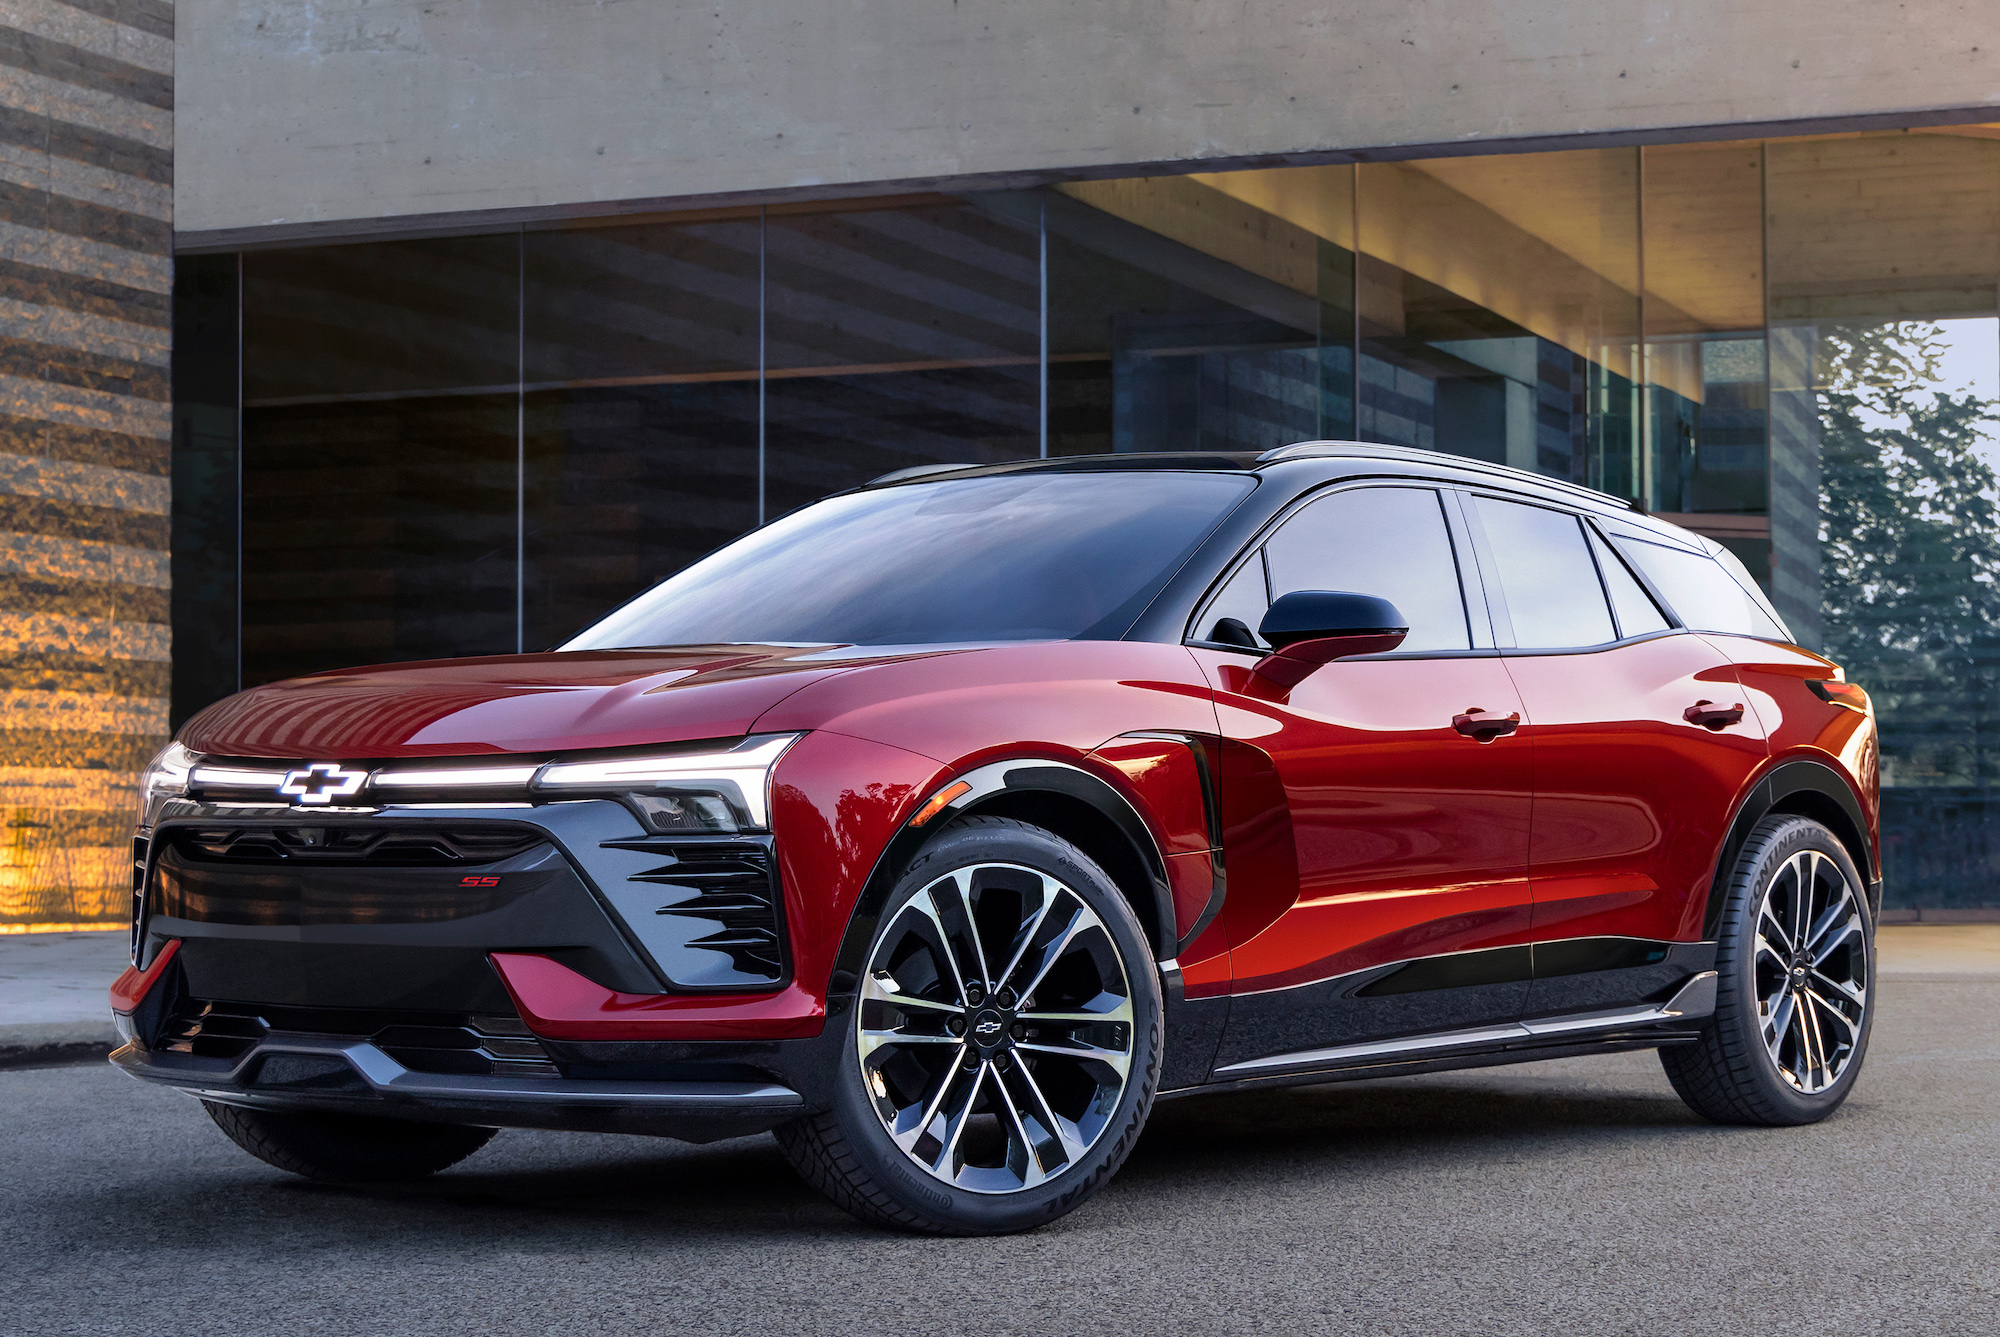 What to expect from the Blazer, Chevy’s new EV